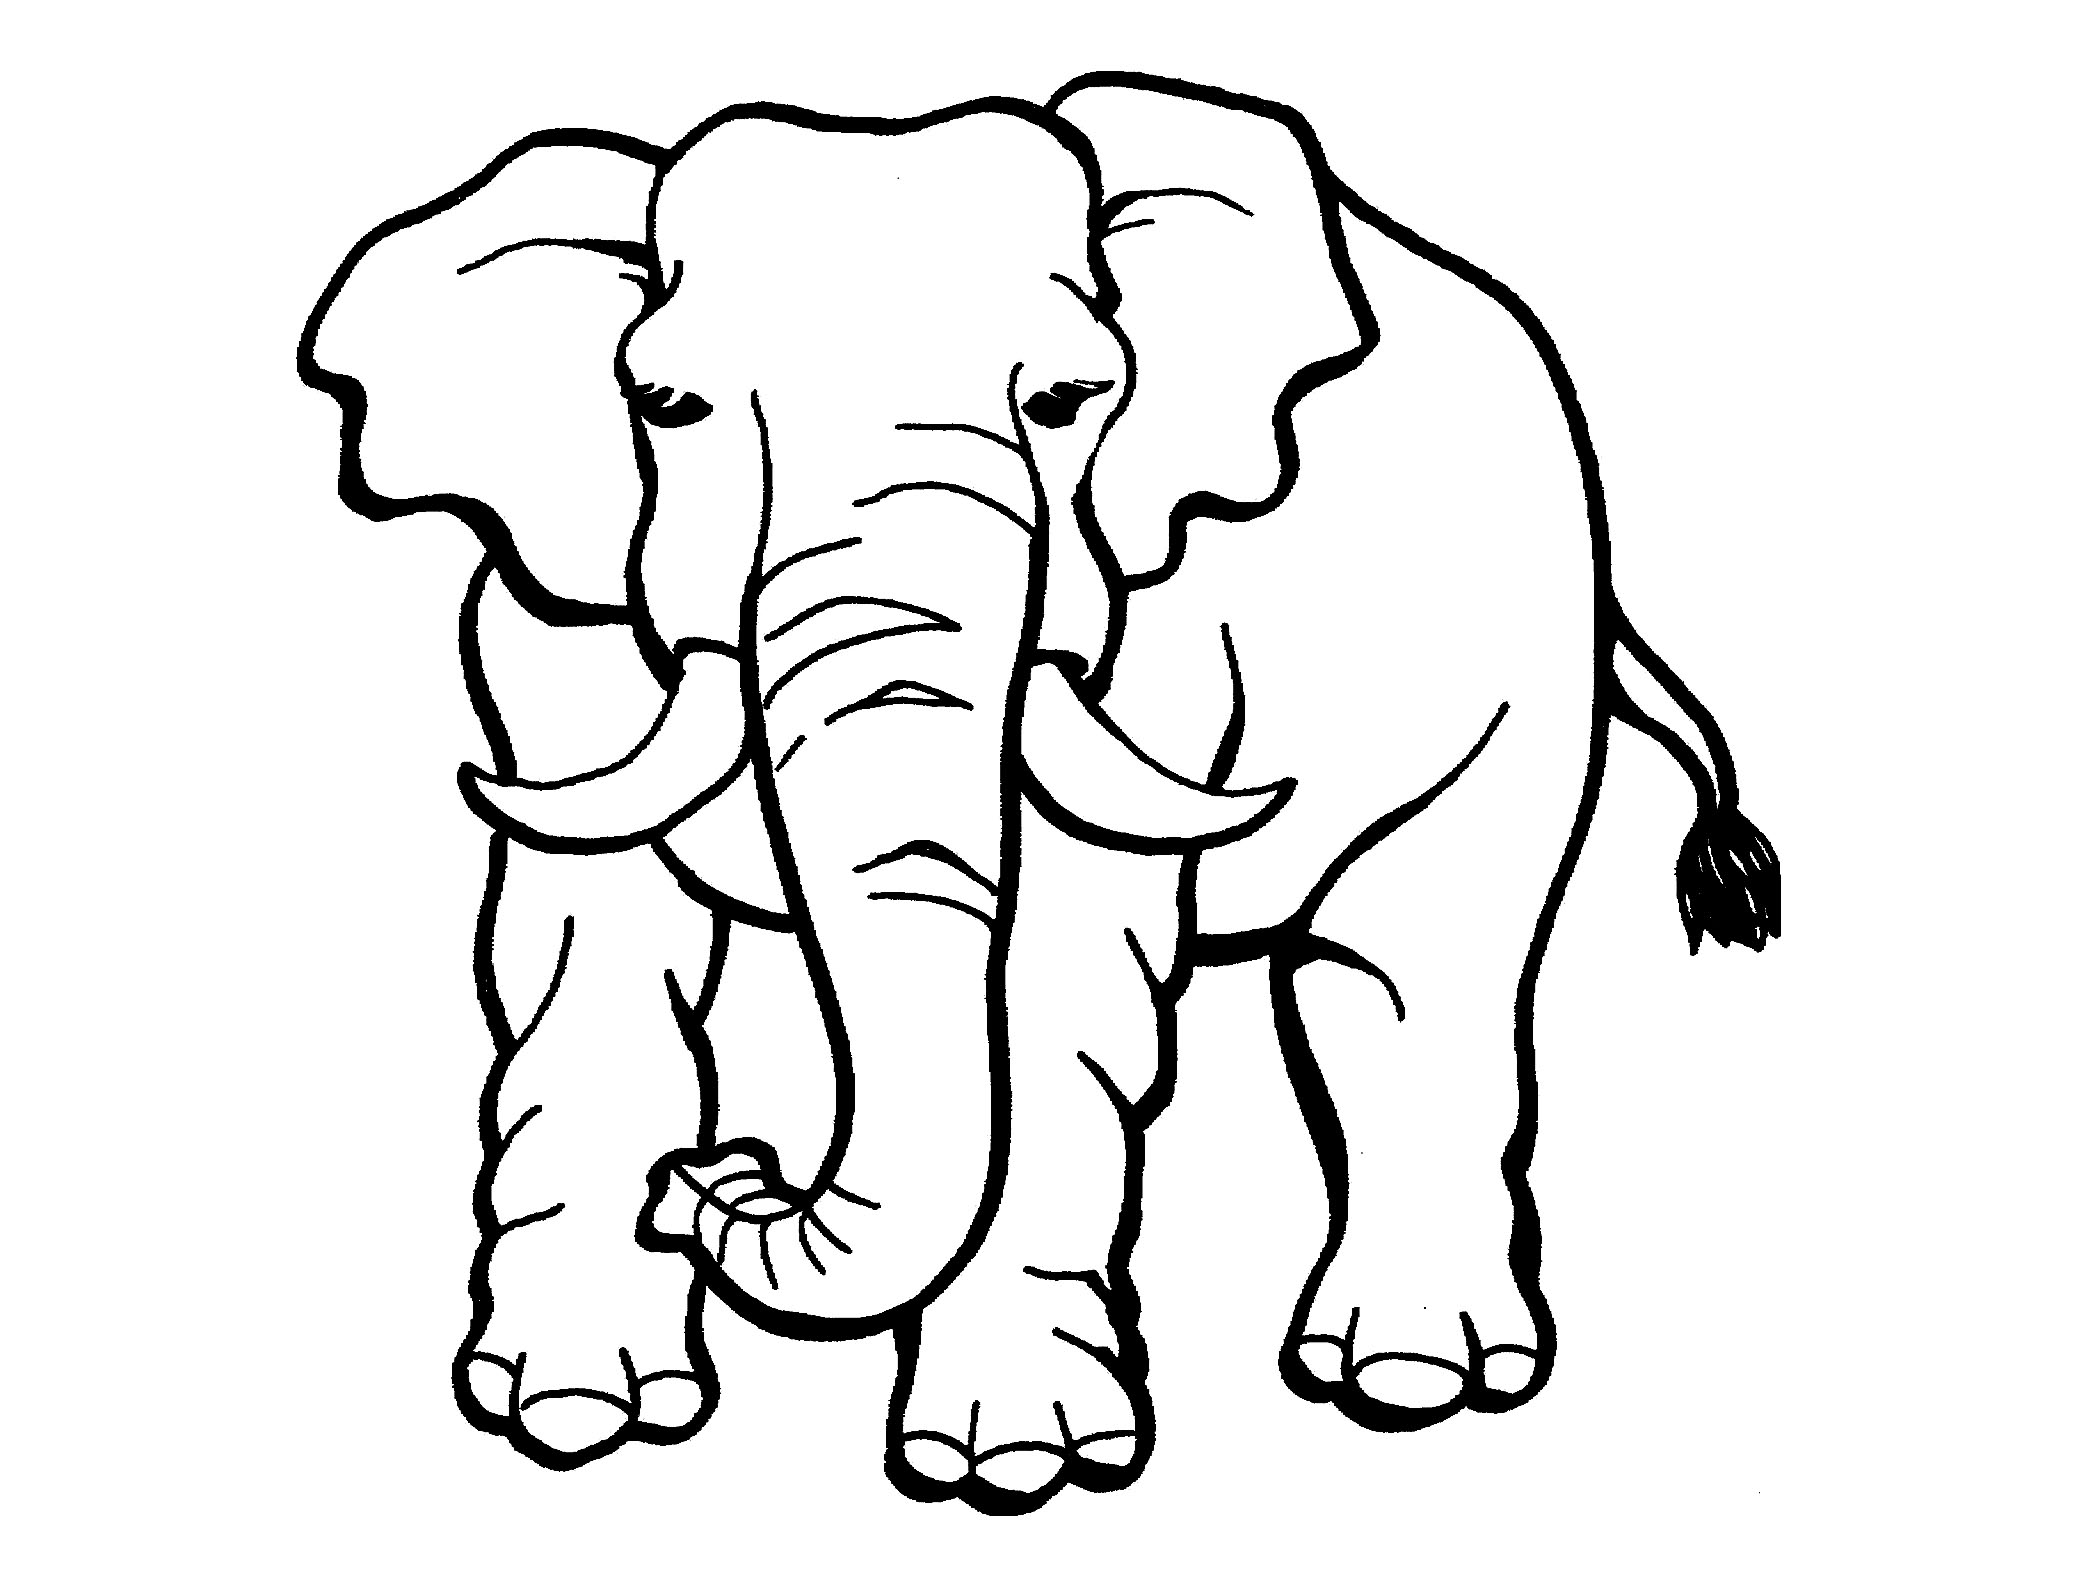 Elephants to print for free